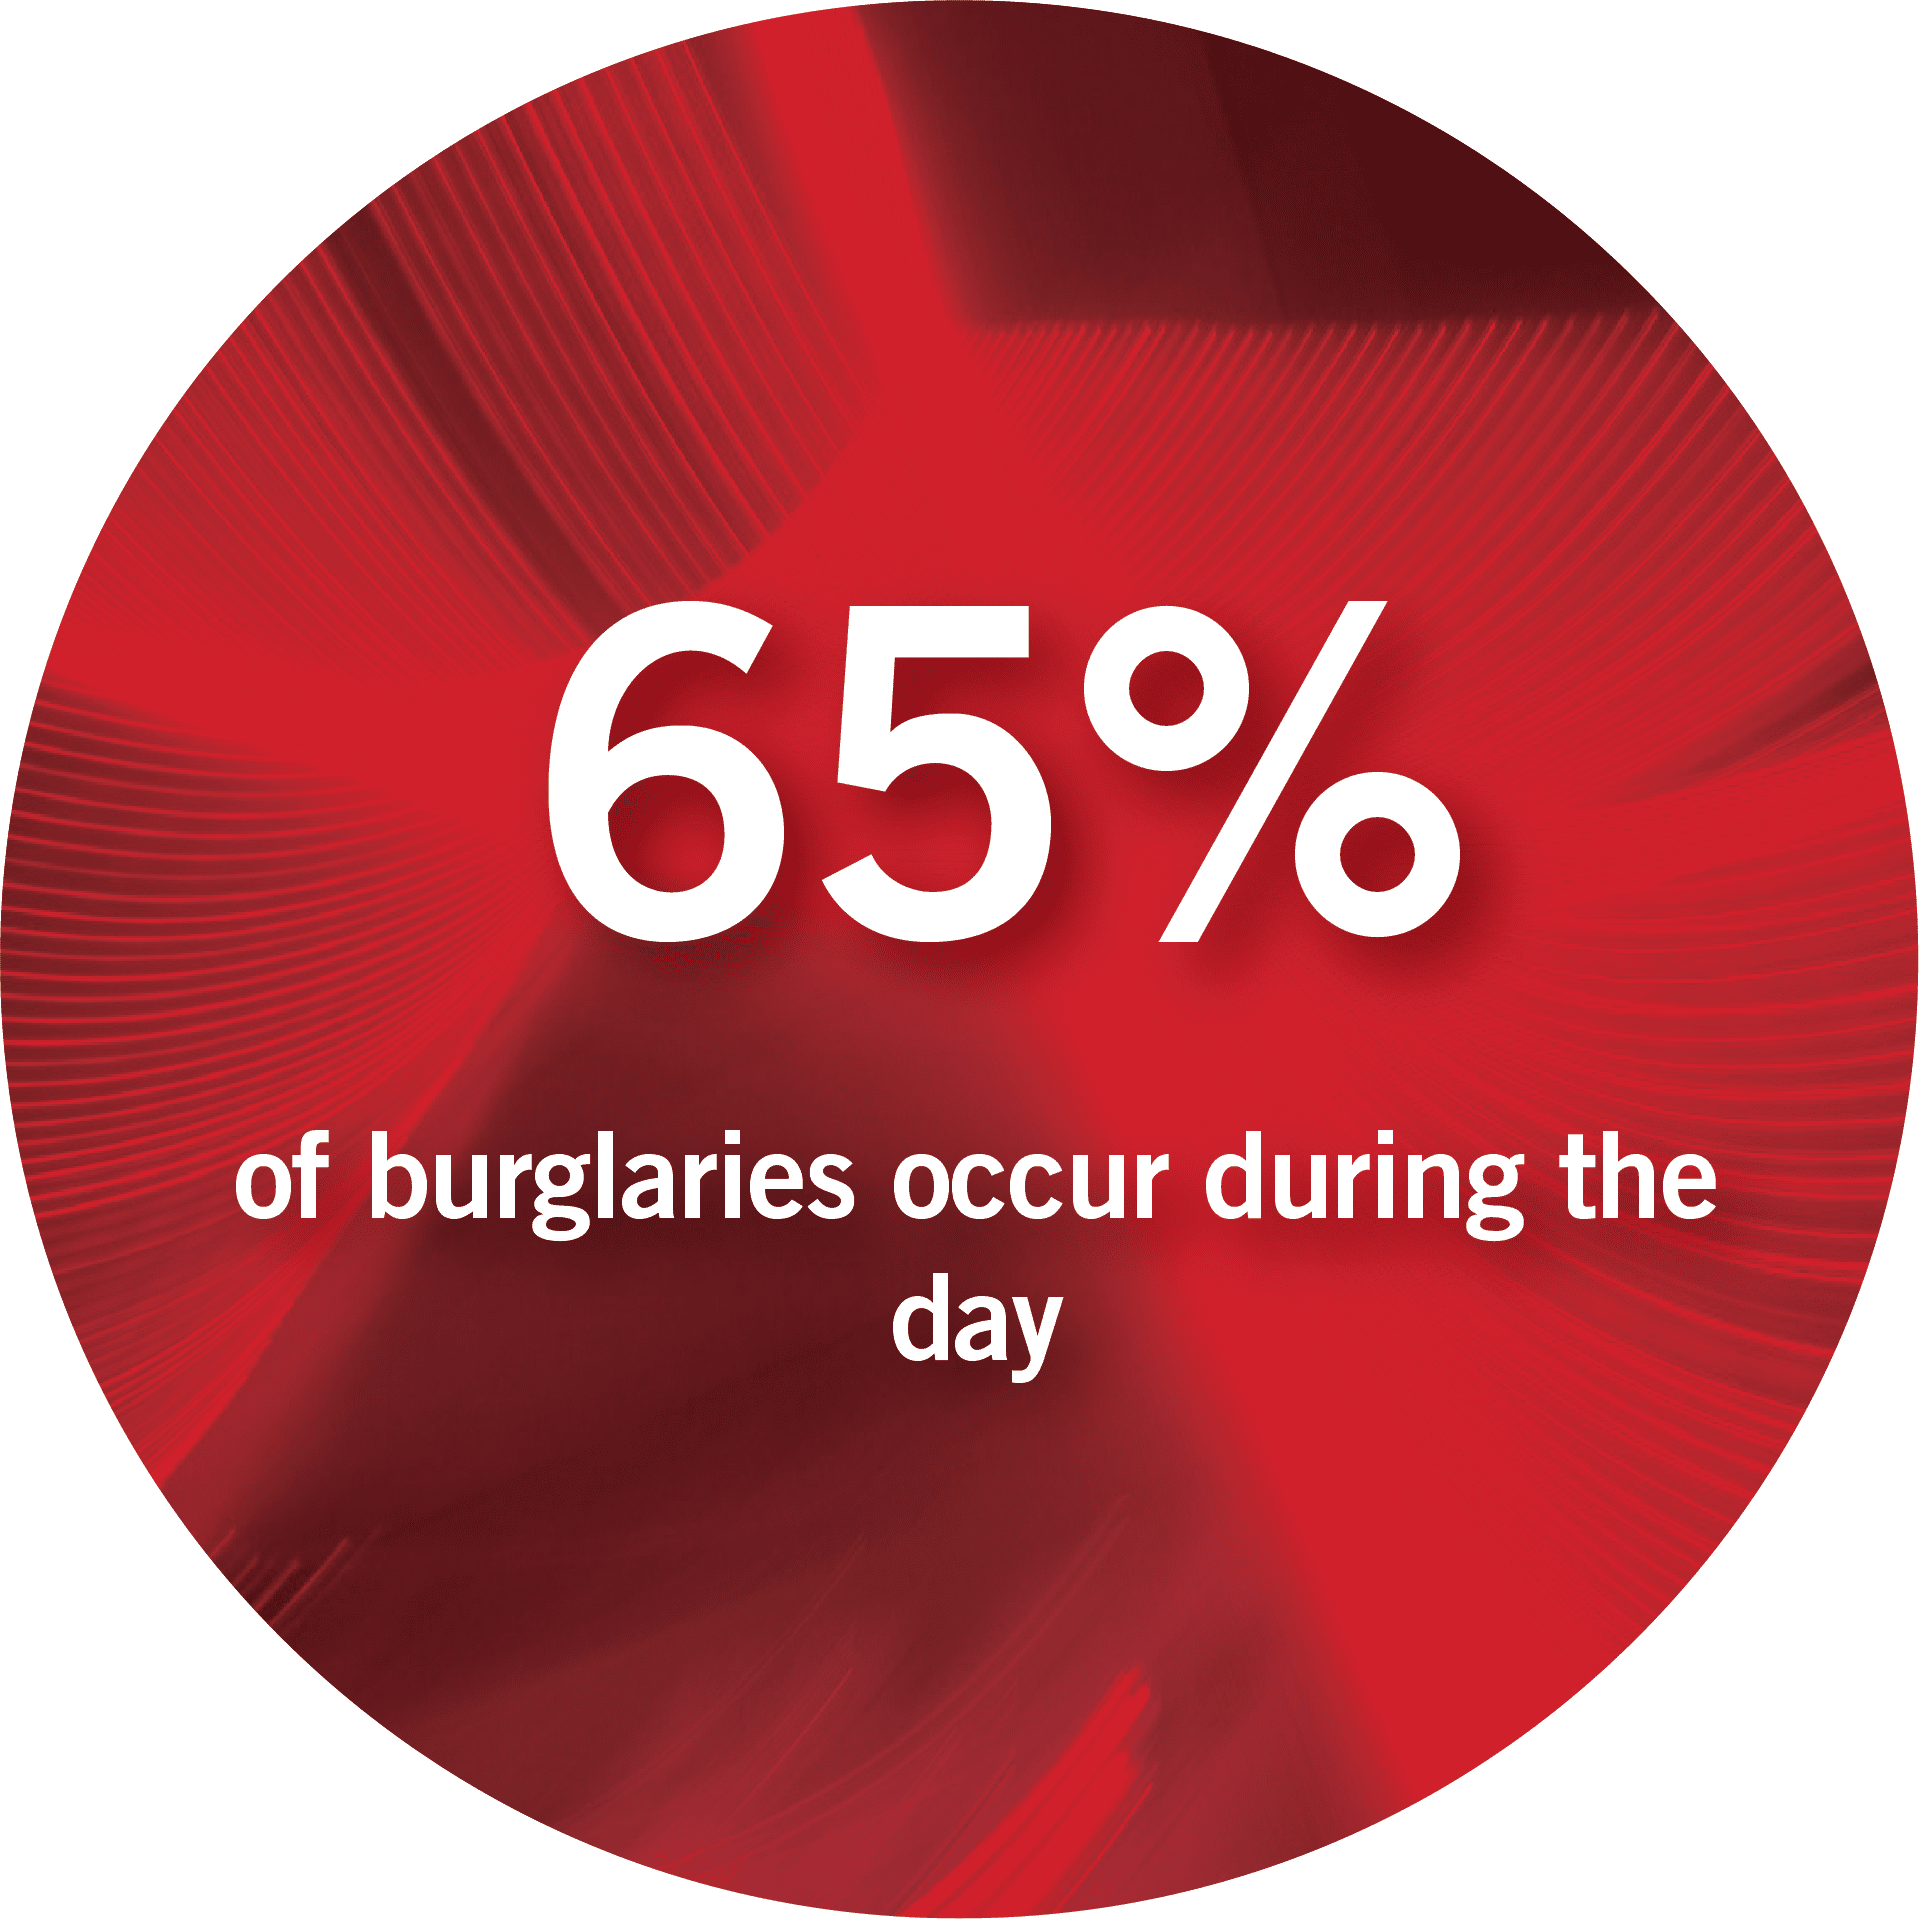 65% of burglaries occur during the day